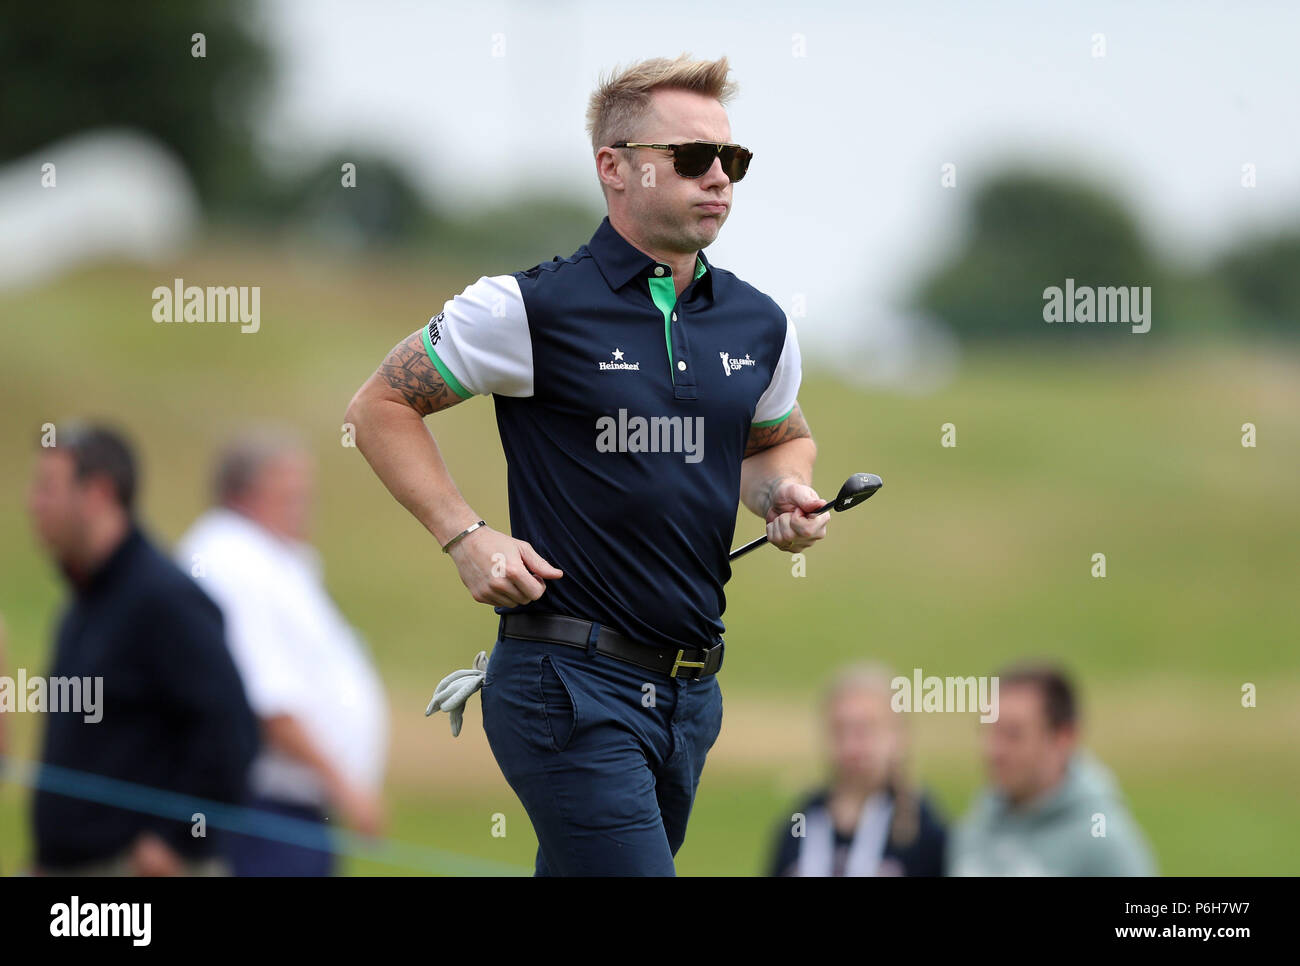 England's Ronan Keating during the Celebrity Cup charity golf tournament at The Celtic Manor Resort in Newport. Stock Photo